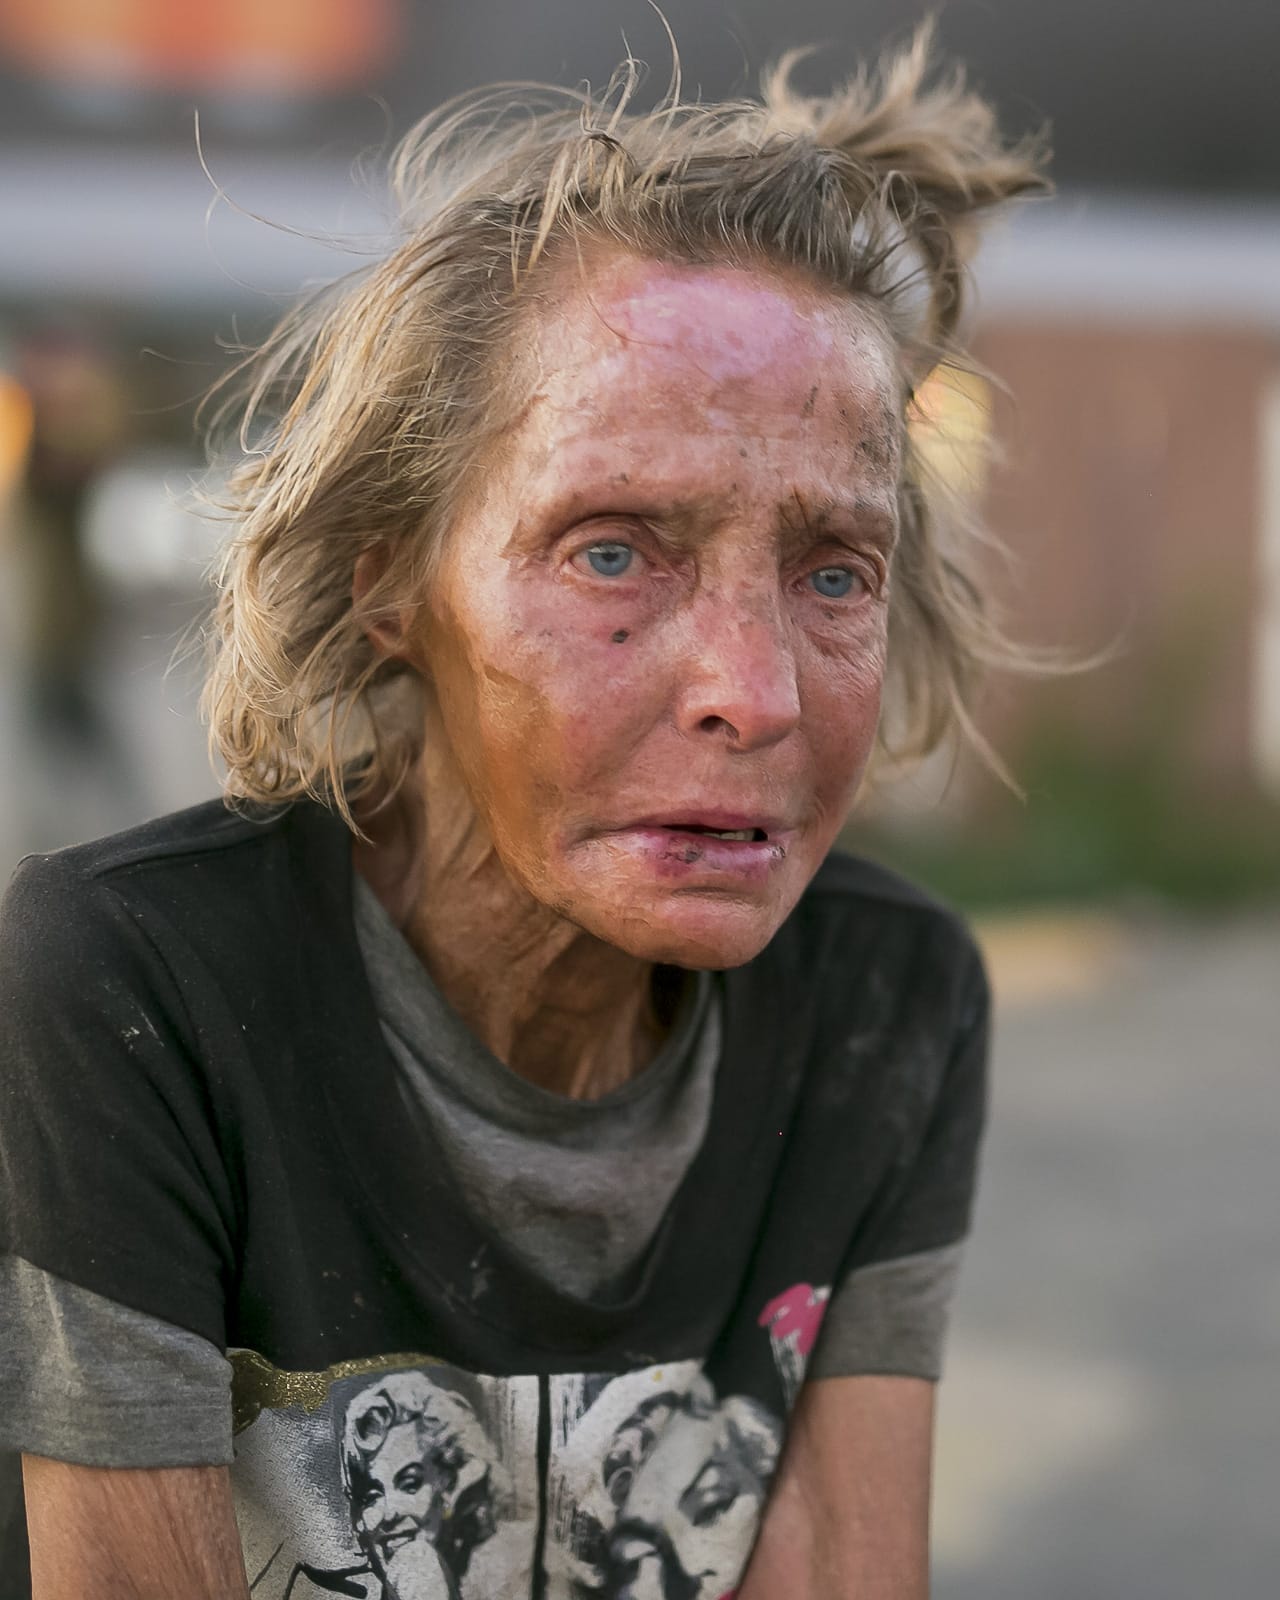 Diana - Portrait of a homeless woman in Dallas by Matthew T Rader